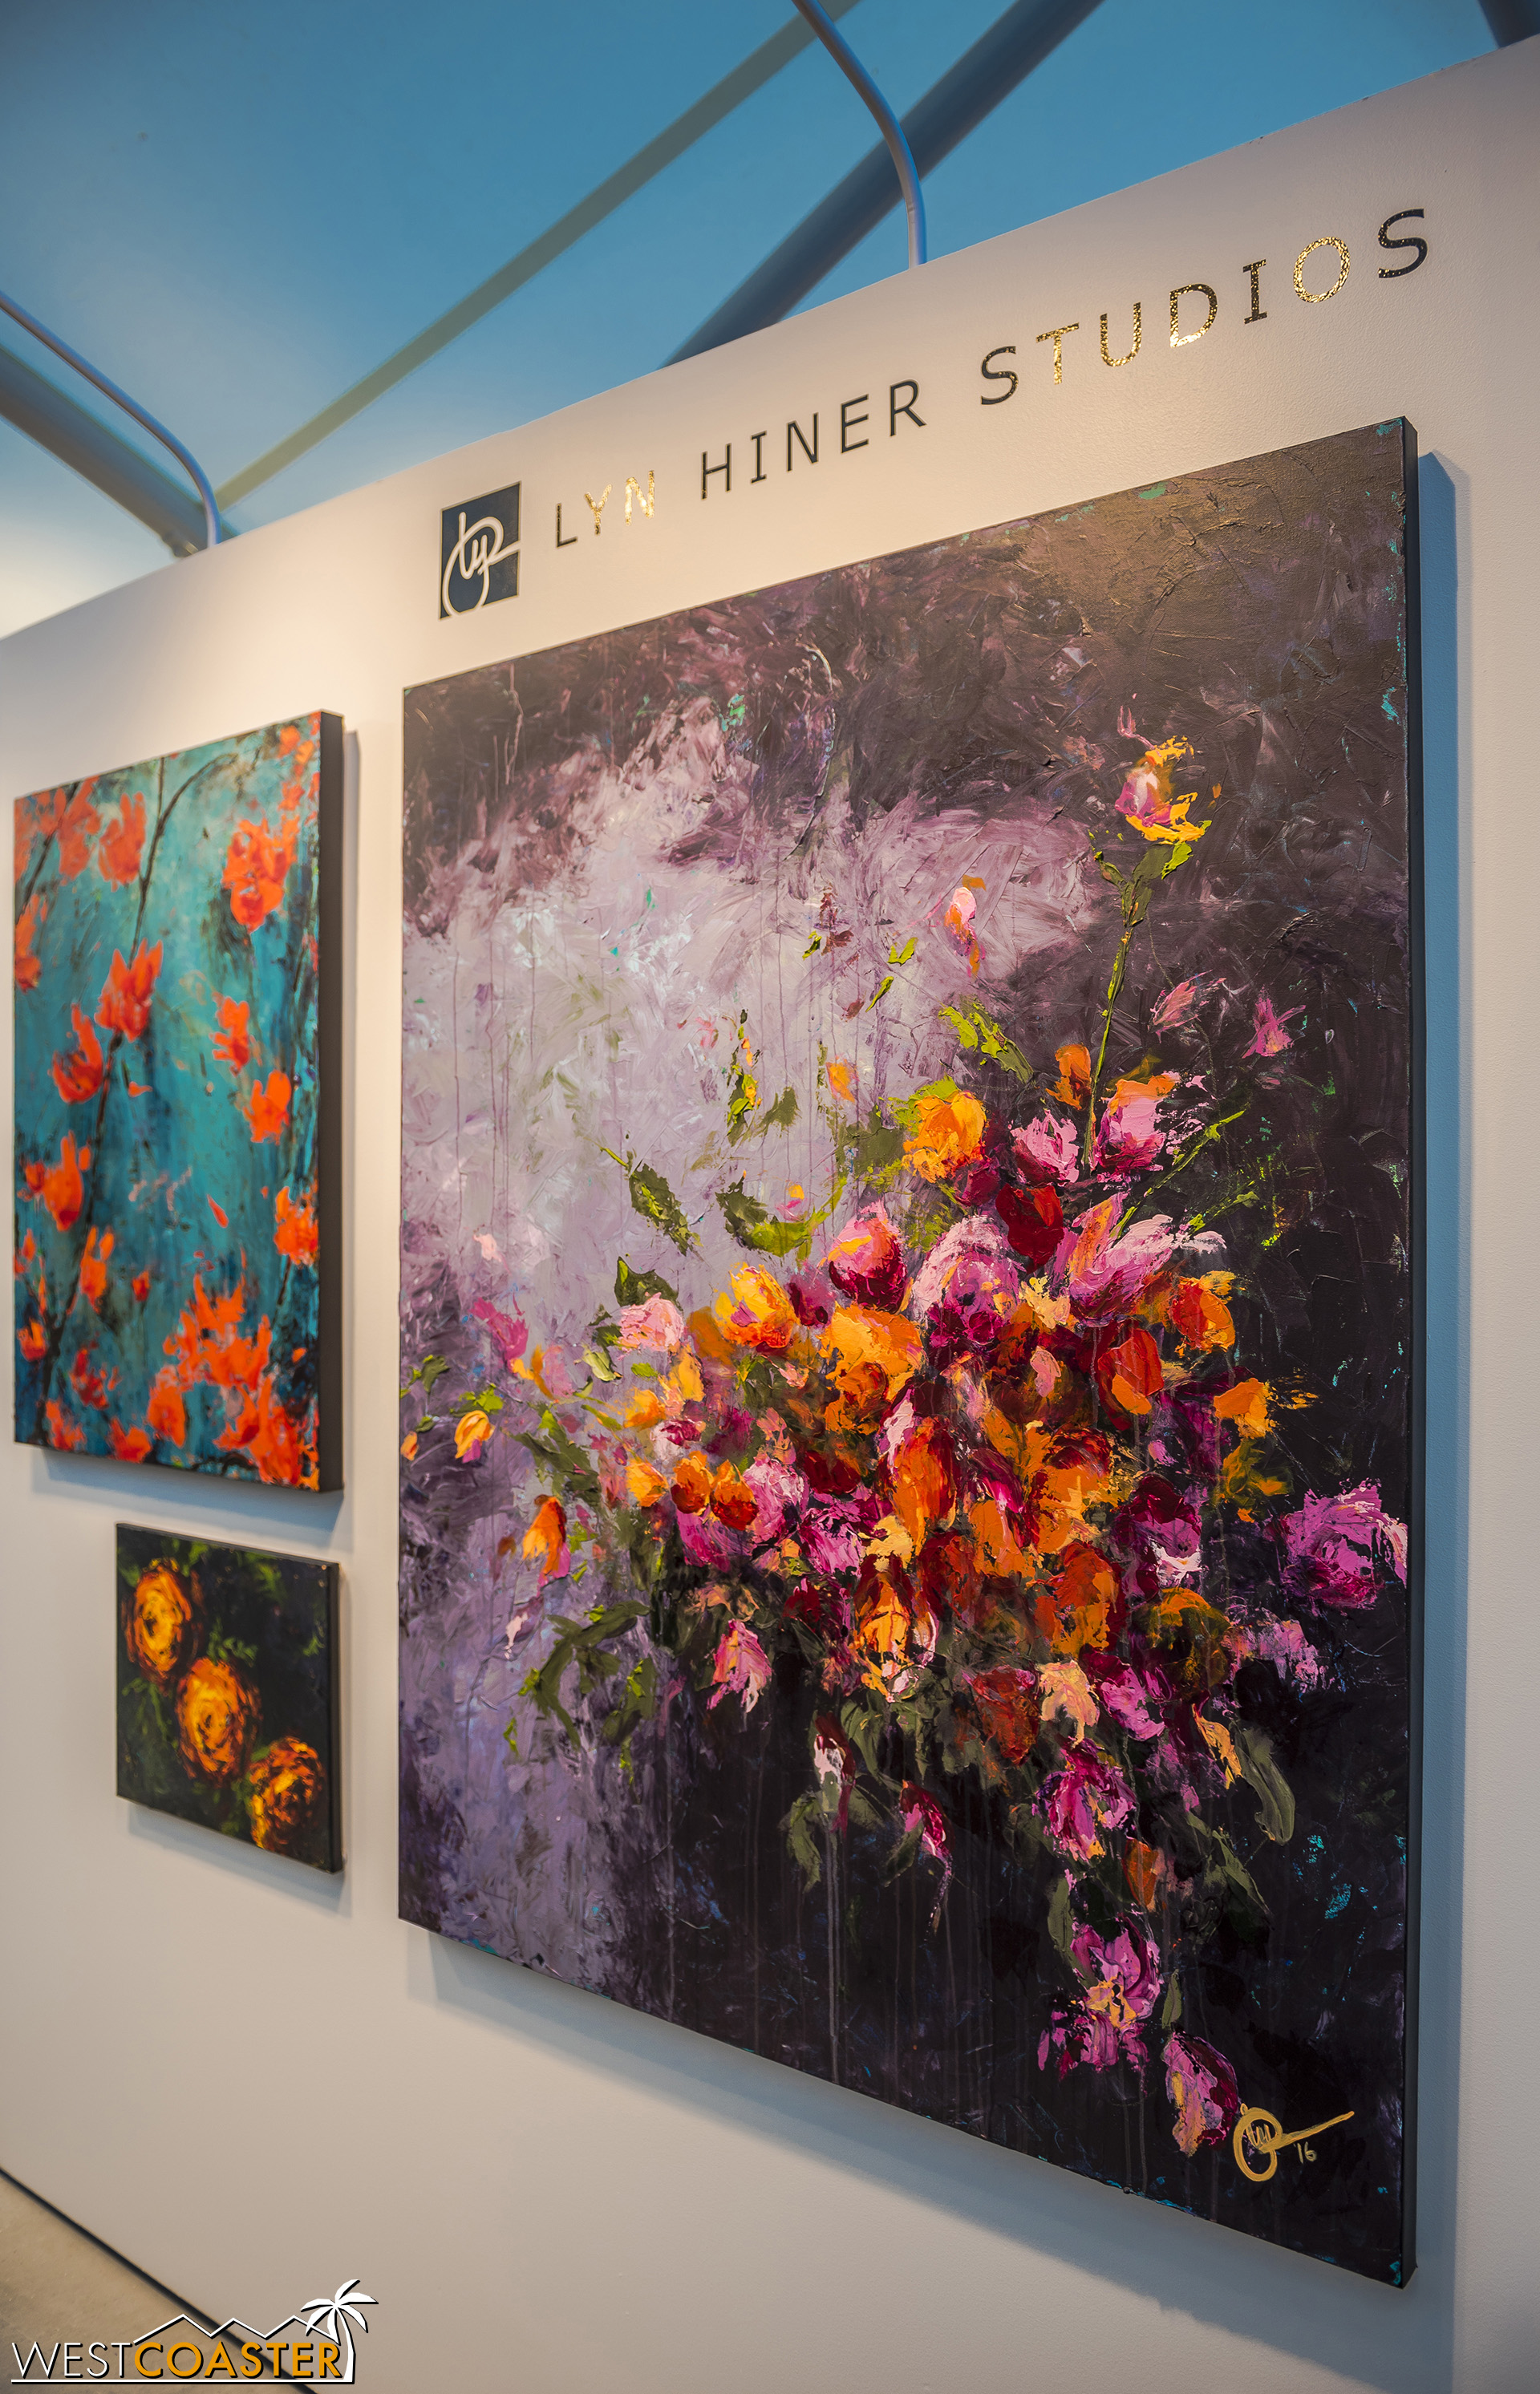  For Lyn Hiner, art was a form of healing that she pursued after being involved in a horrible burn accident.  Painting the whirling, ashen scene of fire and then overlaying with a beauty of rebirth from the flowers helped her work through the emotion